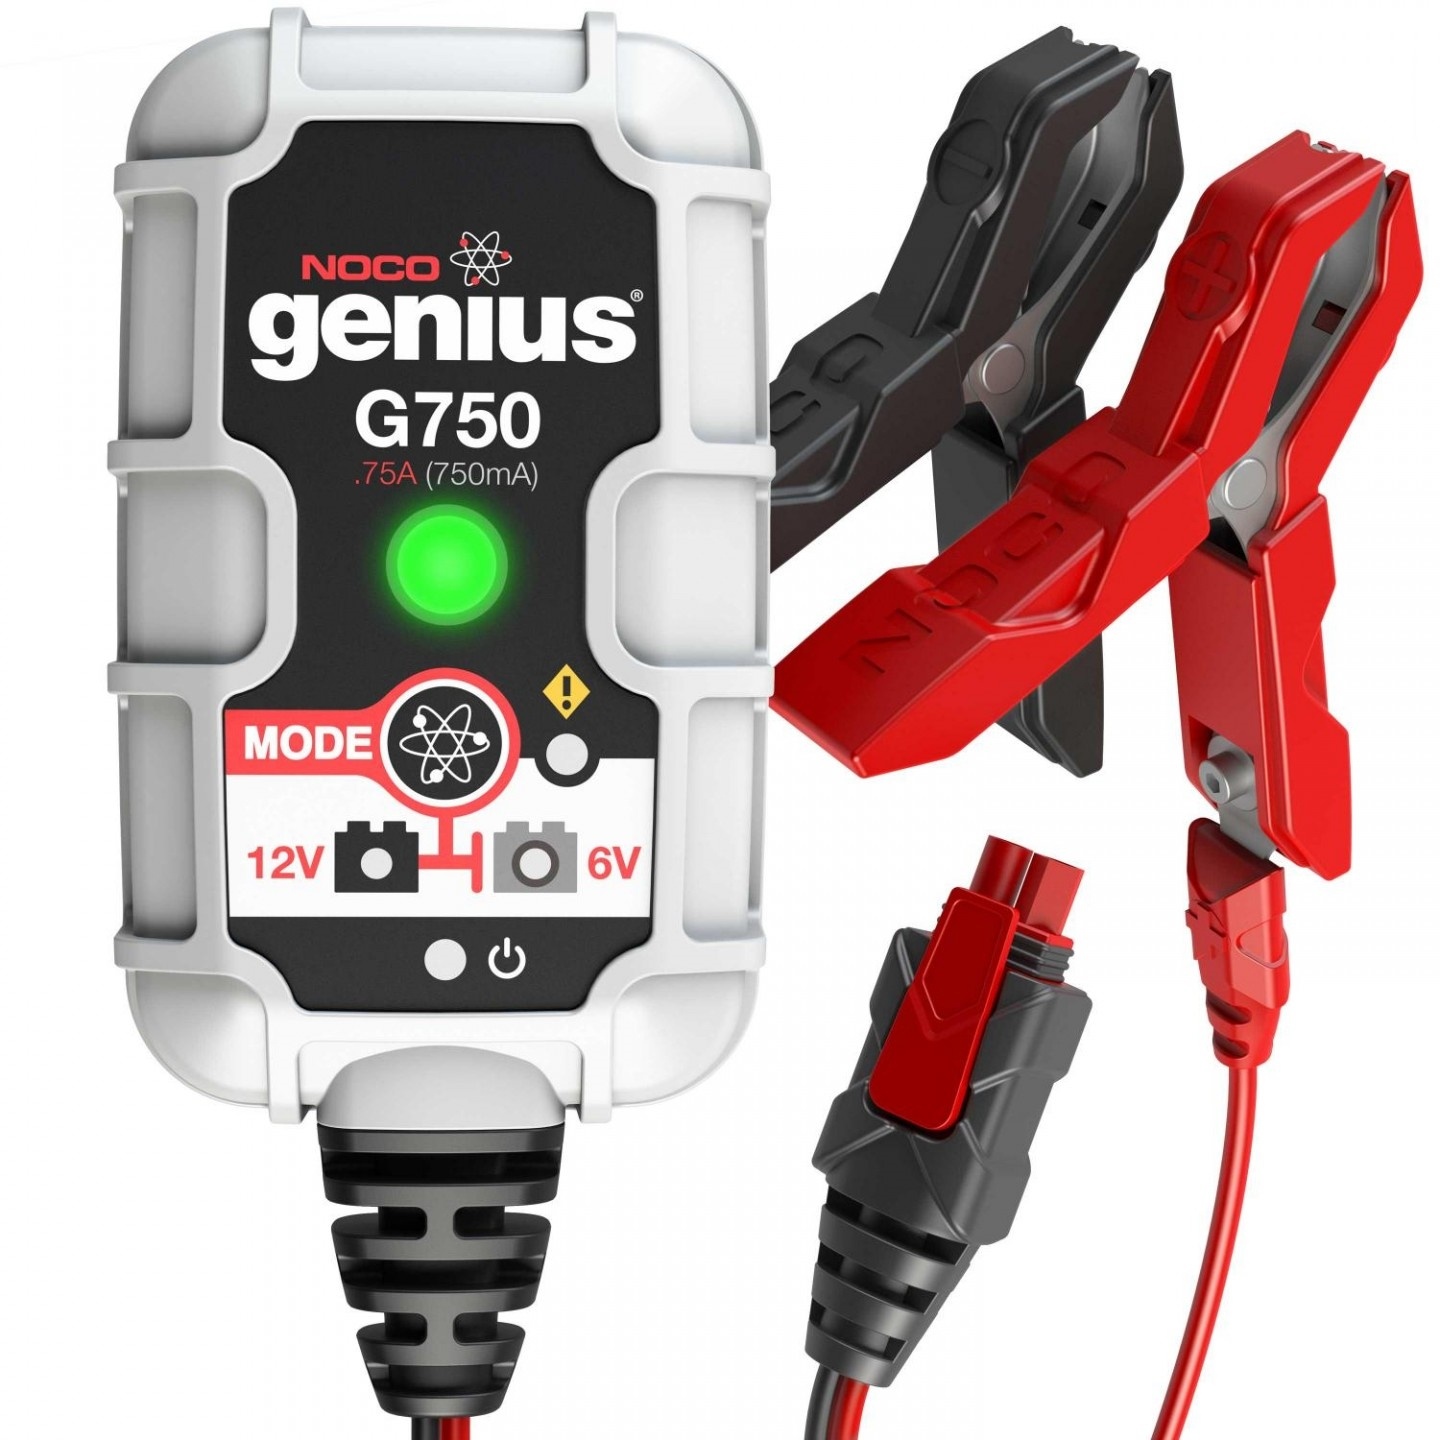 Noco Genius G750 Smart Battery Charger